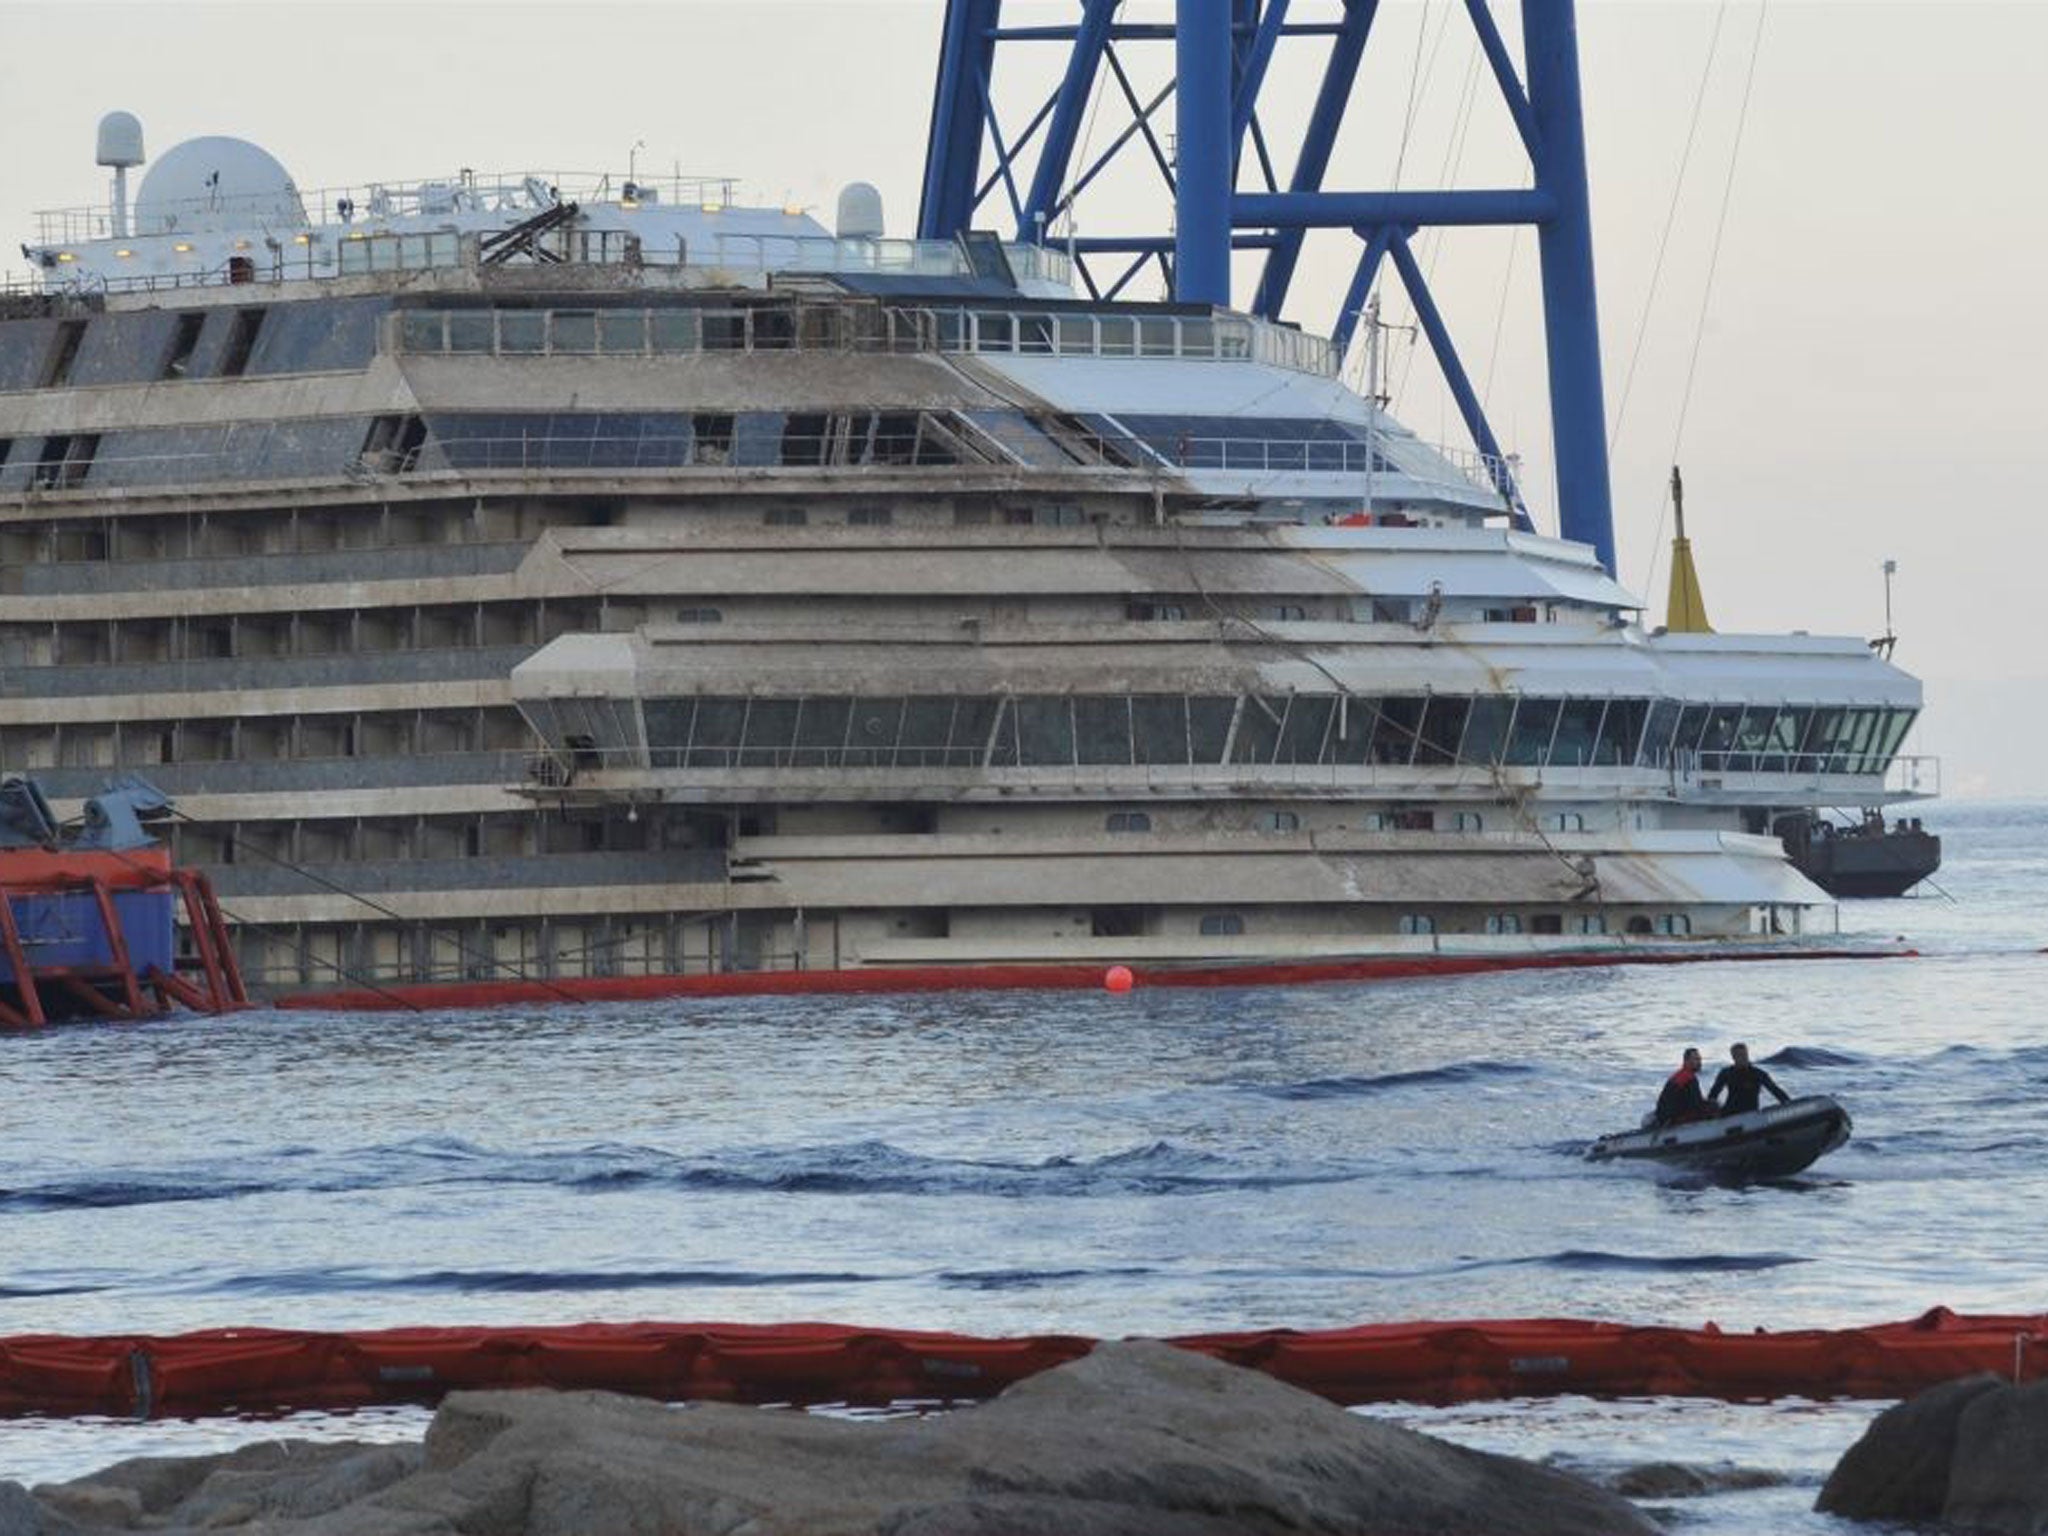 Carabinieri (national military police) bring ashore a box containing the remains of a person found during searches aboard the Costa Concordia ship